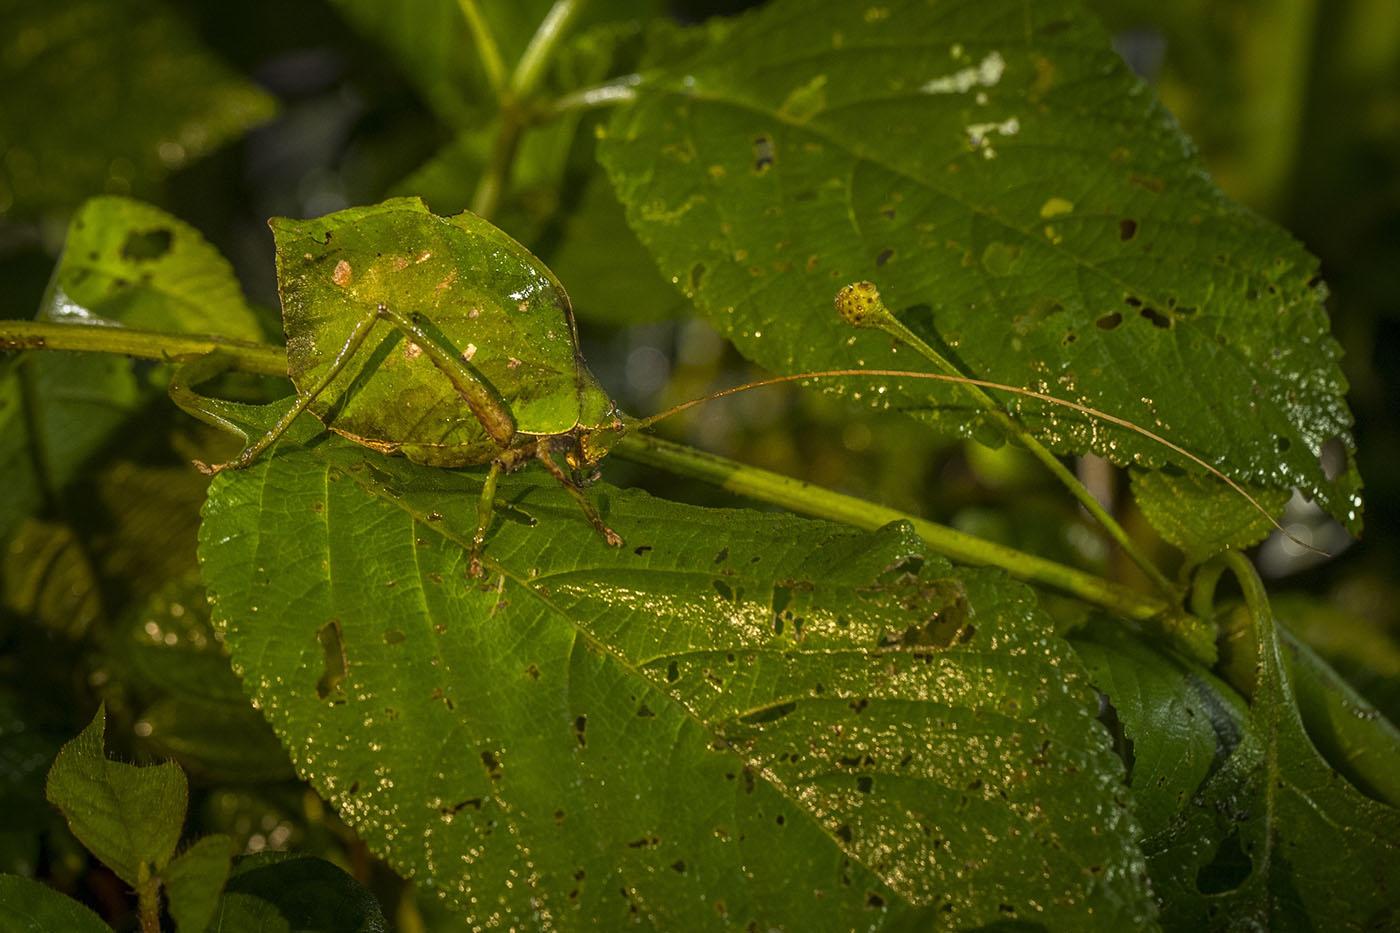 A Katydid insect. Photo: SK Films